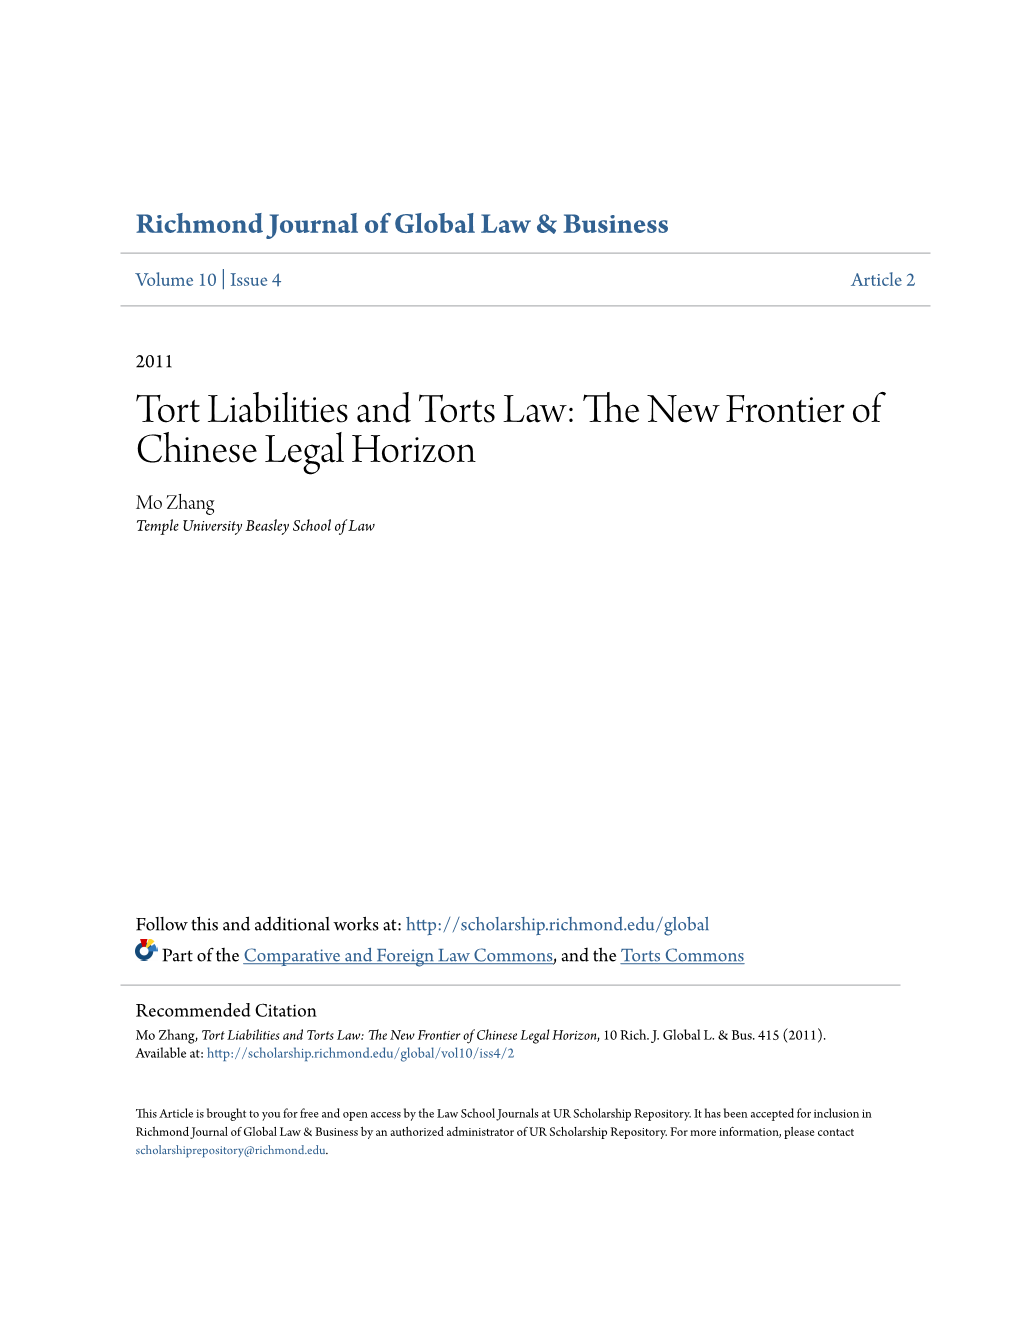 Tort Liabilities and Torts Law: the New Frontier of Chinese Legal Horizon, 10 Rich